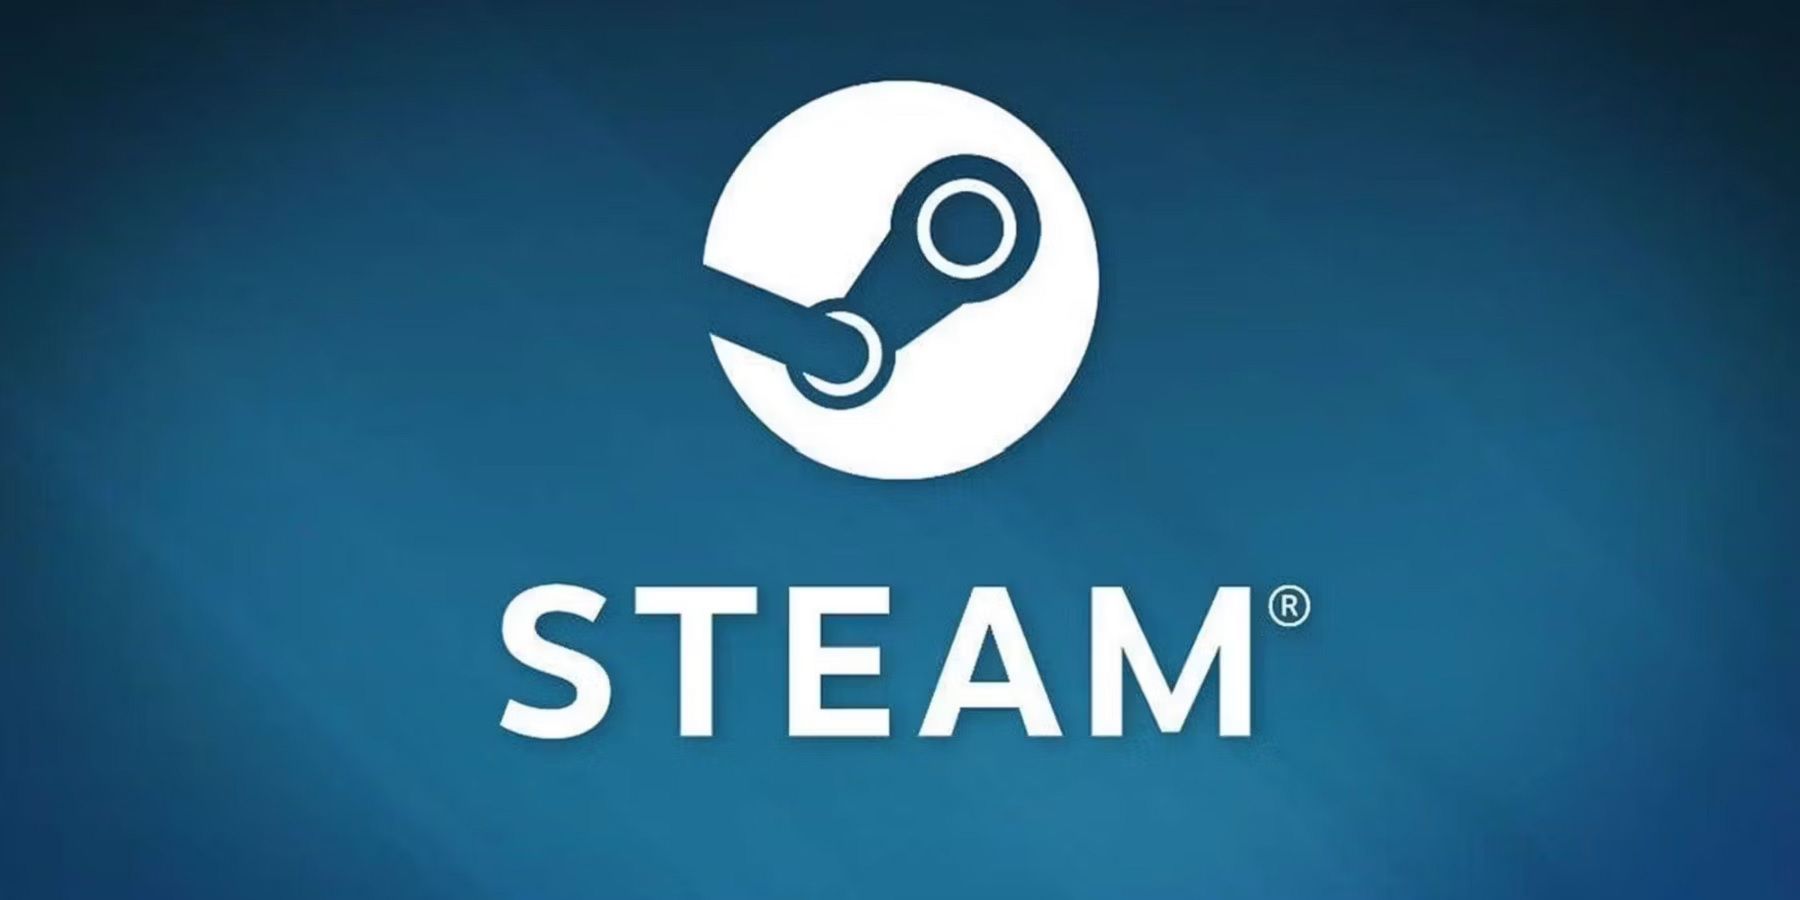 steam logo with light blue background